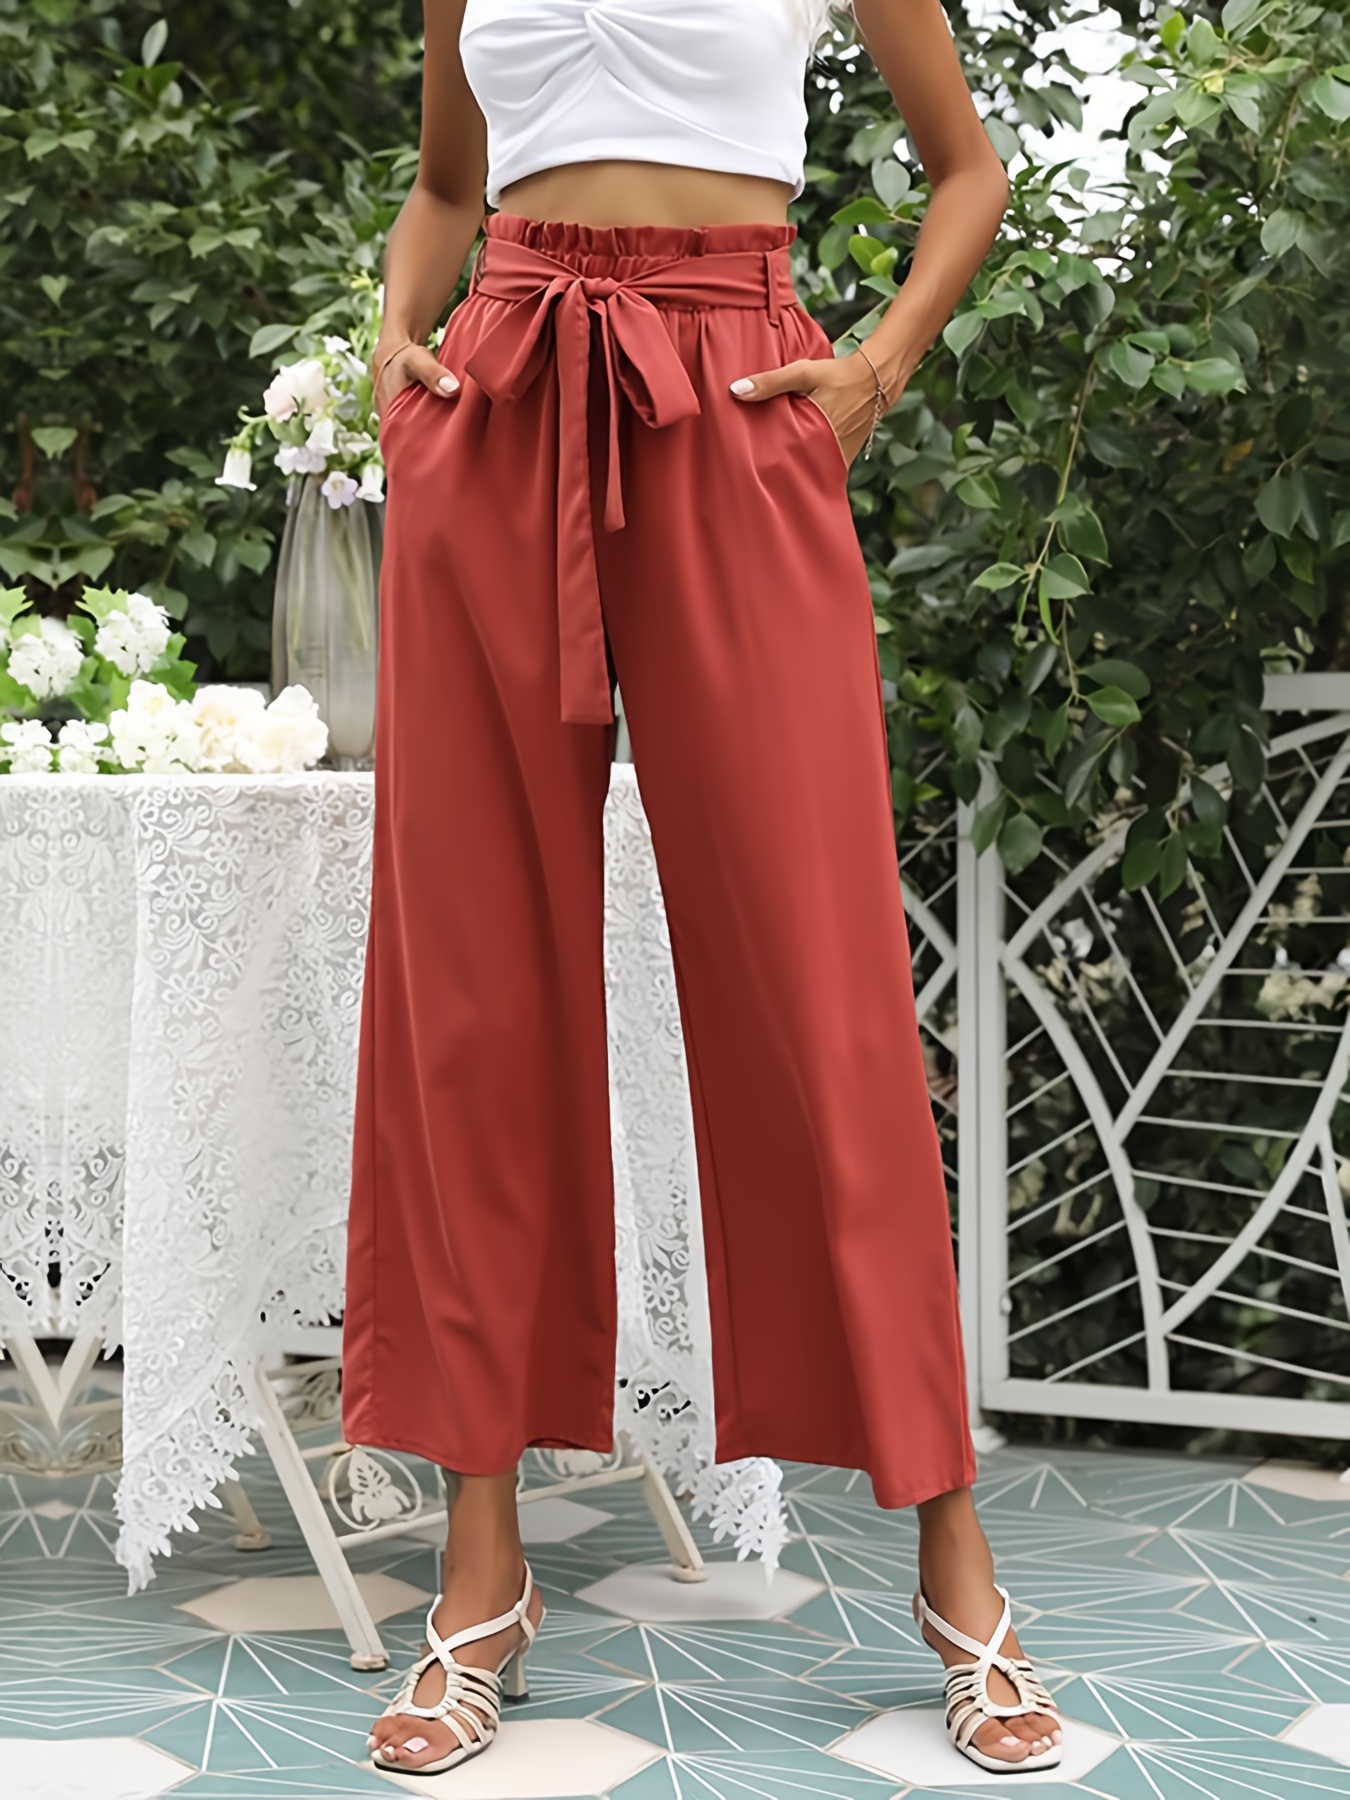 Women's Casual Pants Size 16 Women Summer High Waisted Cotton Palazzo Pants  Wide Leg Long Pant Trousers with Pocket Womens Bohemian Bow Tie Crop Top  with High Waist (Beige, S) : 